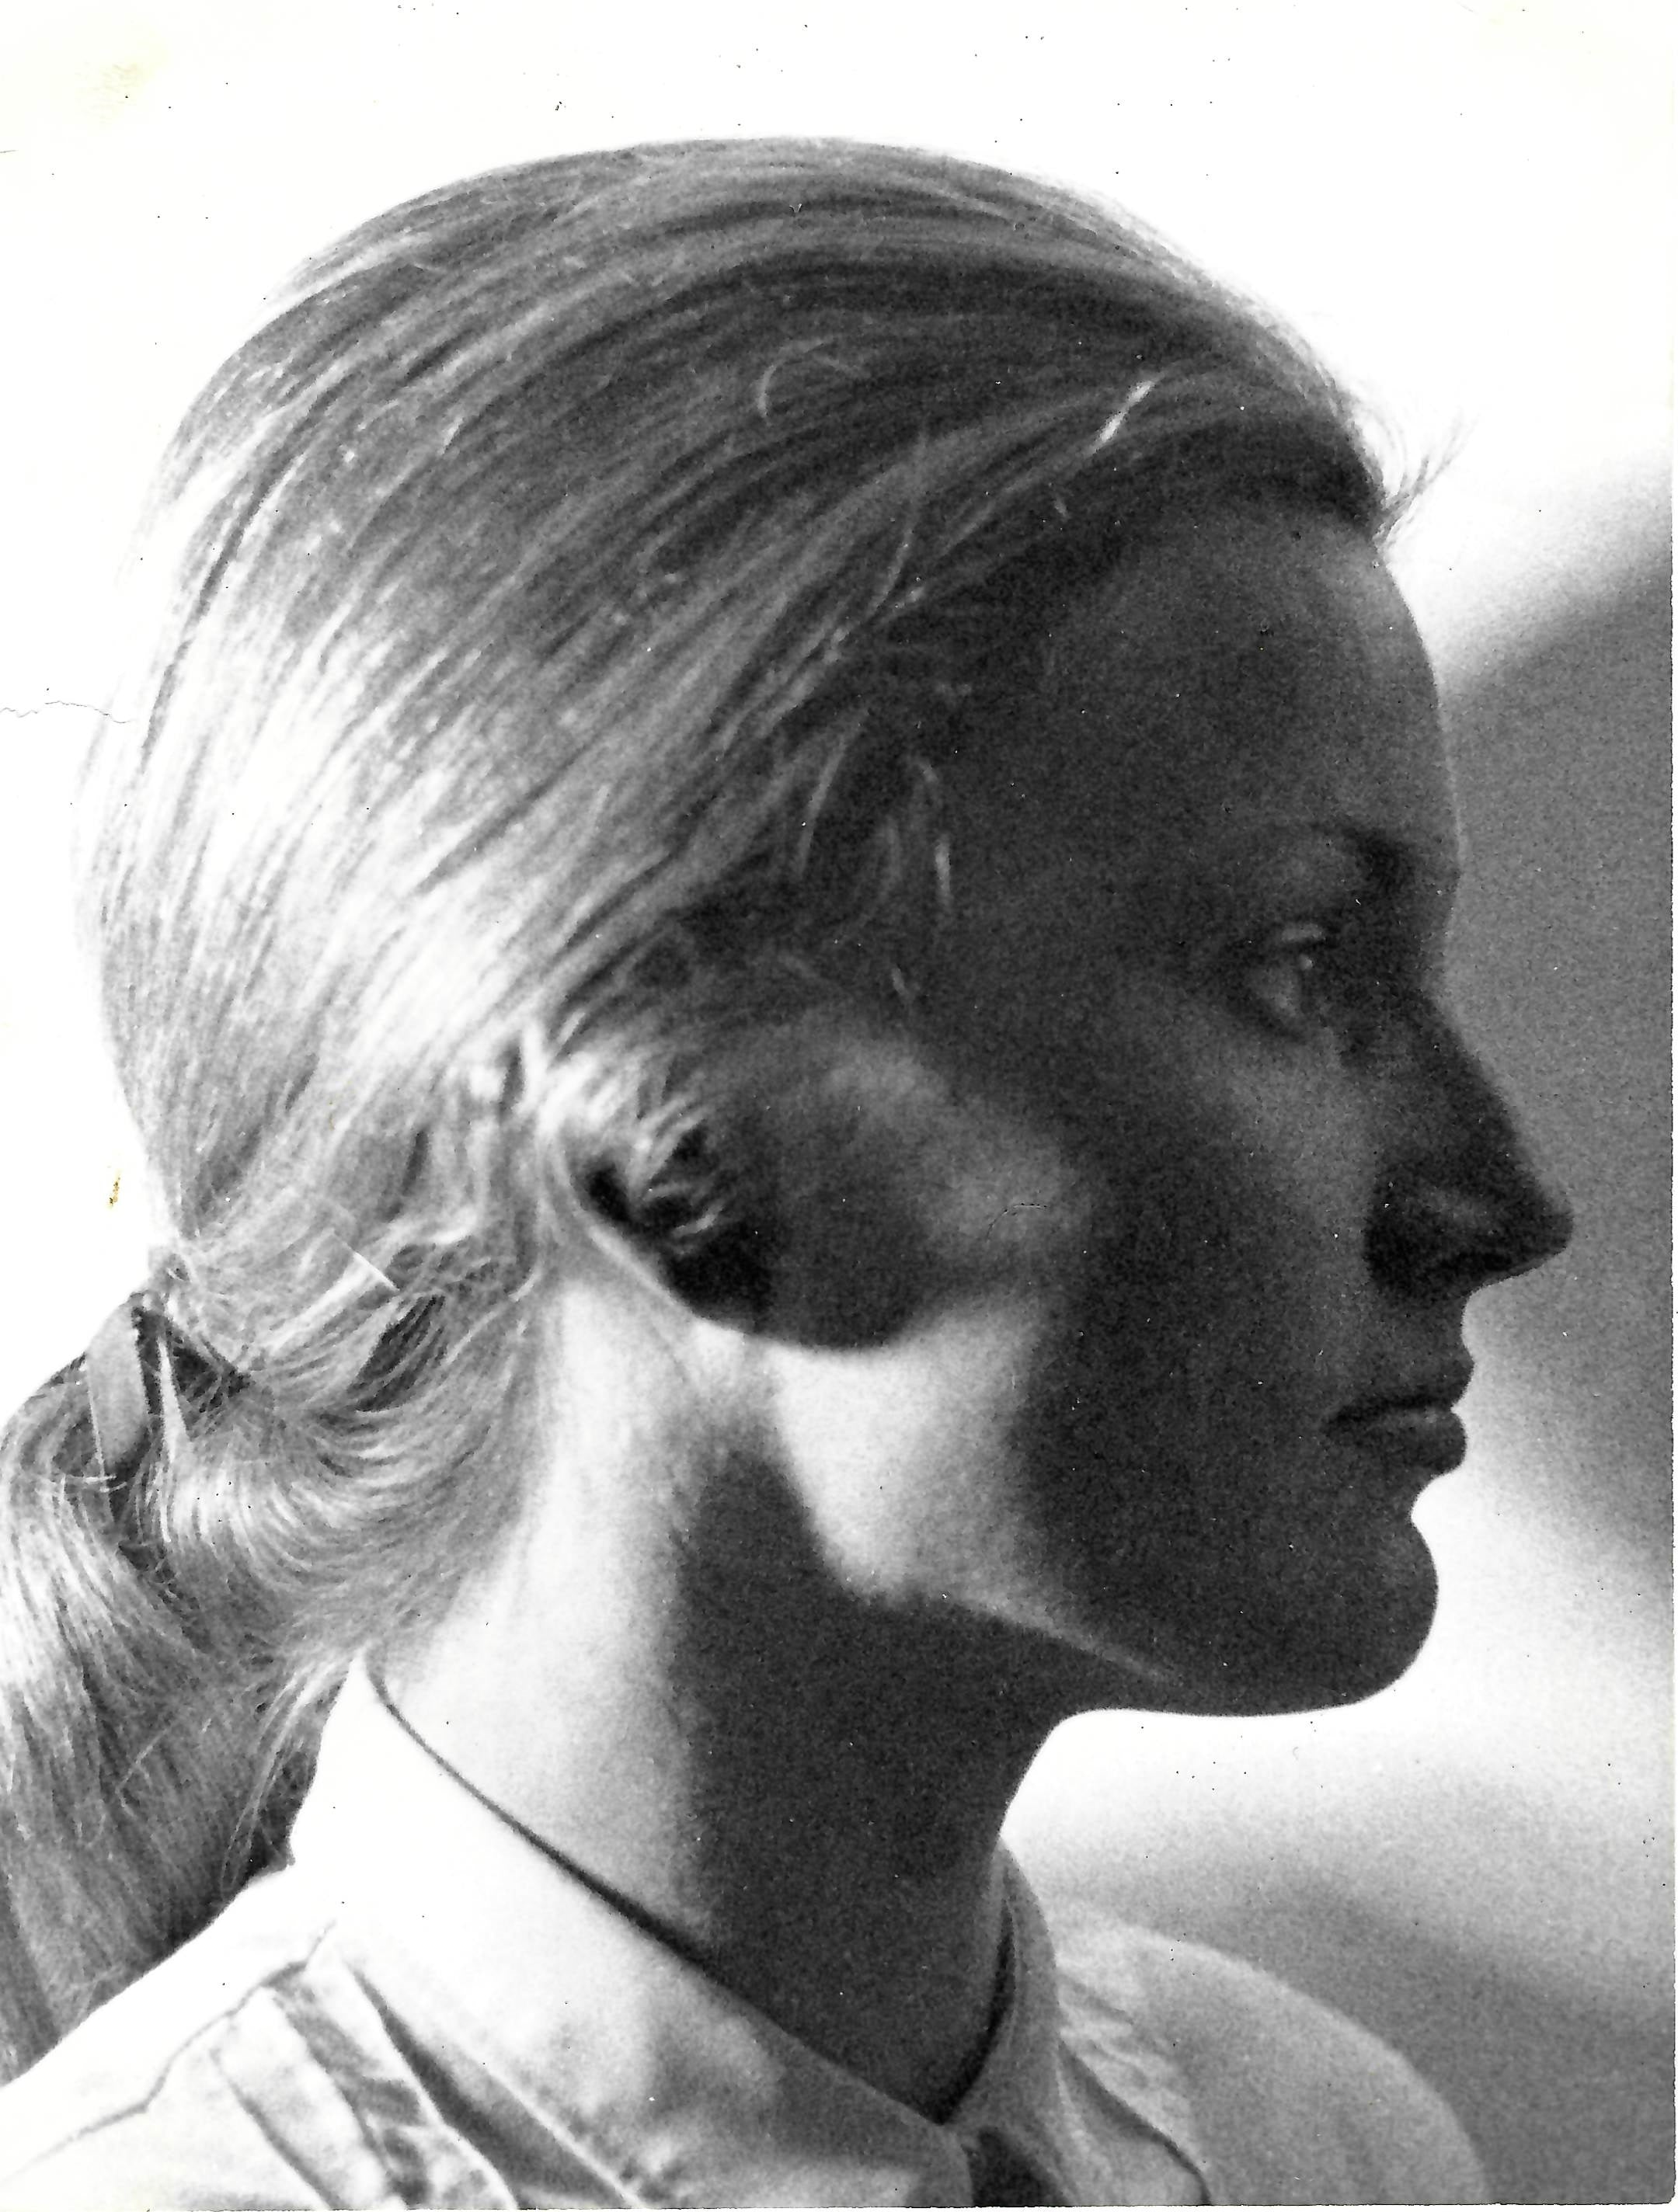 Fashion designer Helga Okan (formerly Grünwoldt), founder of PIO O'KAN, as a young woman aged 18 in the 60s.